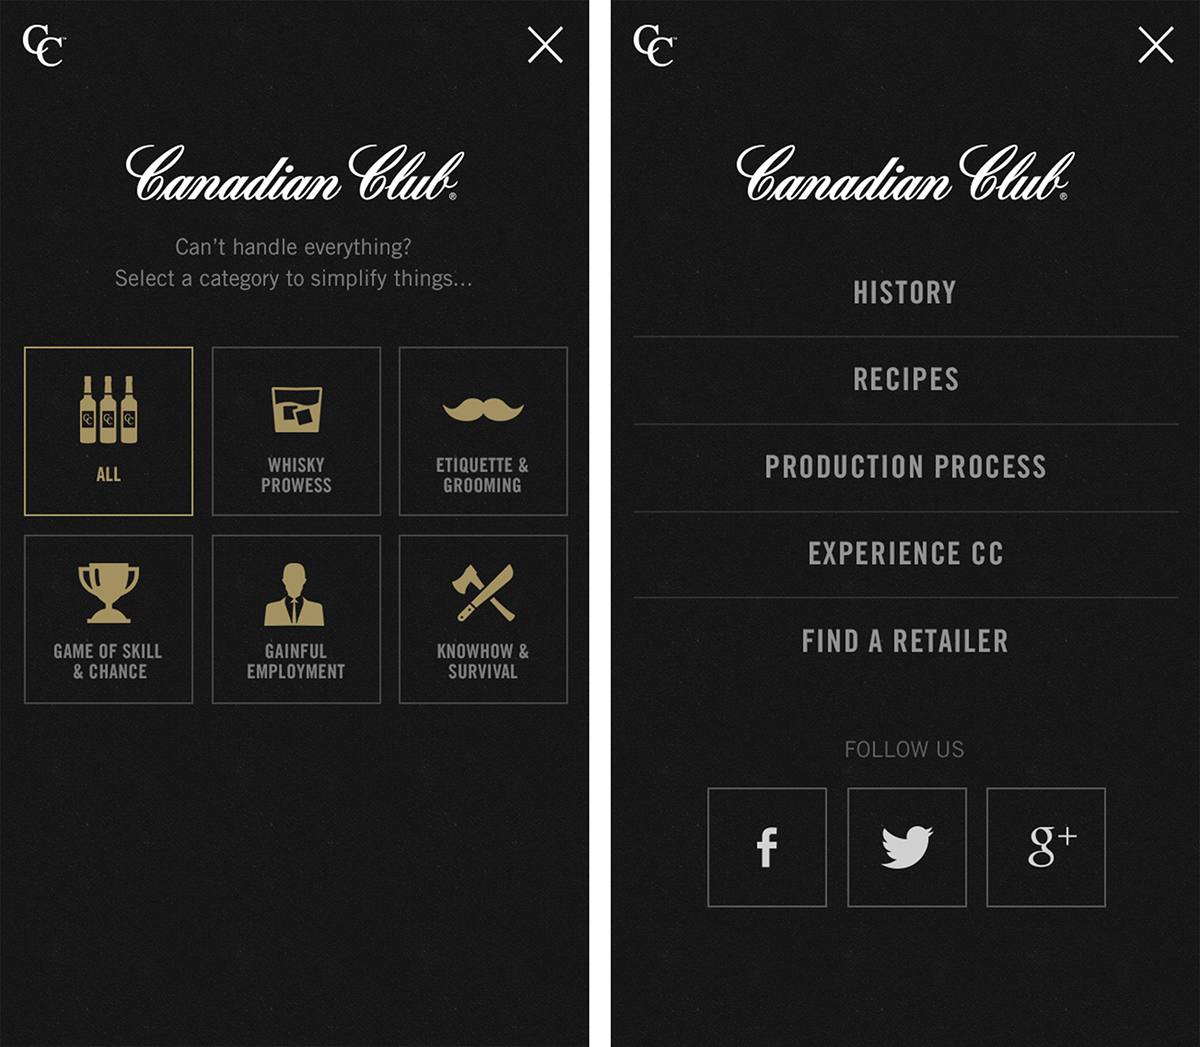 Whisky drink social feed html5 Canadian Club HYFN gold book tumblr design Website Responsive